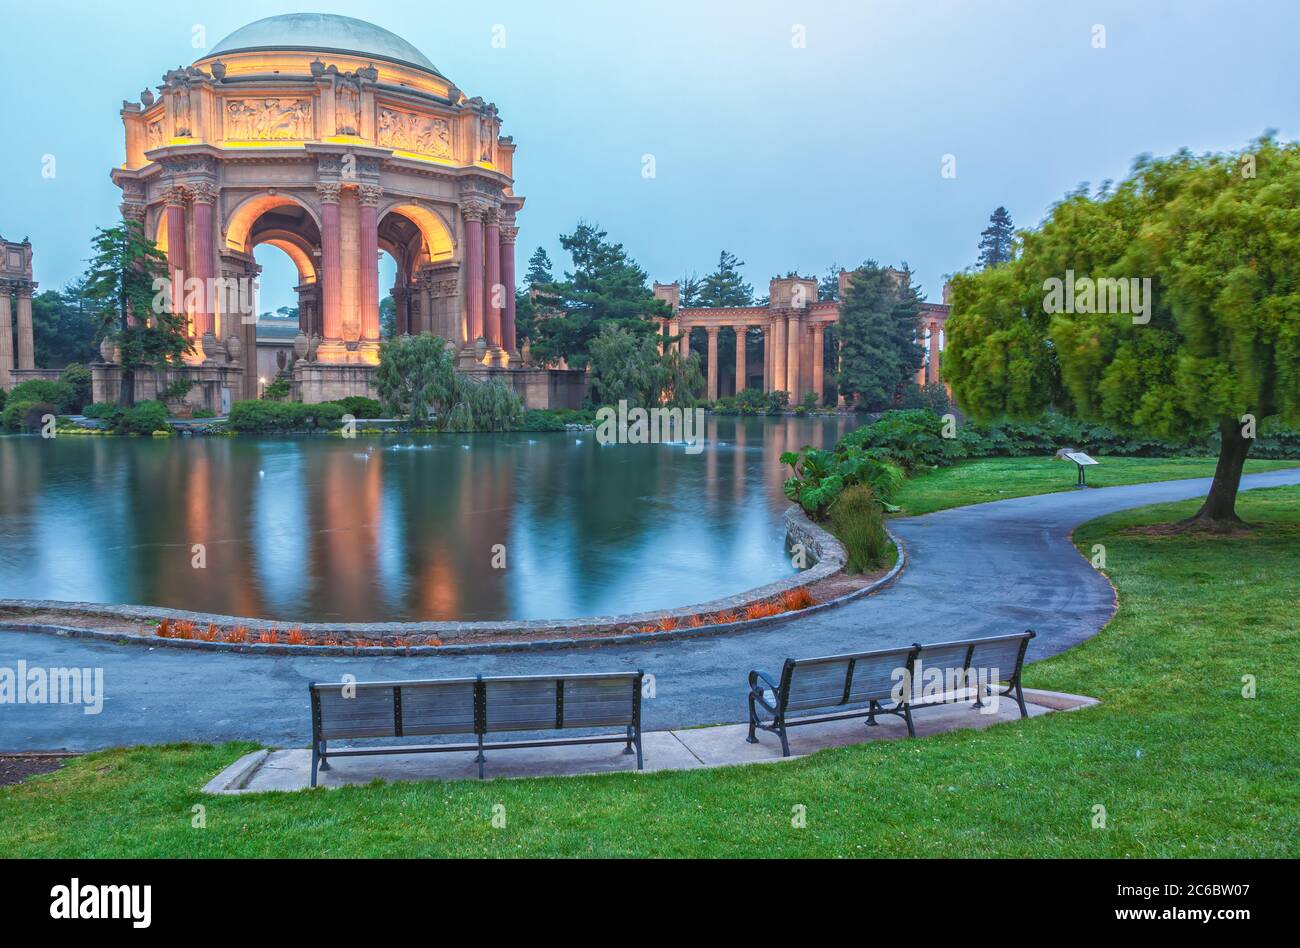 Scenic view of the Palace of Fine Arts at early dawn, San Francisco, California, United States. Stock Photo